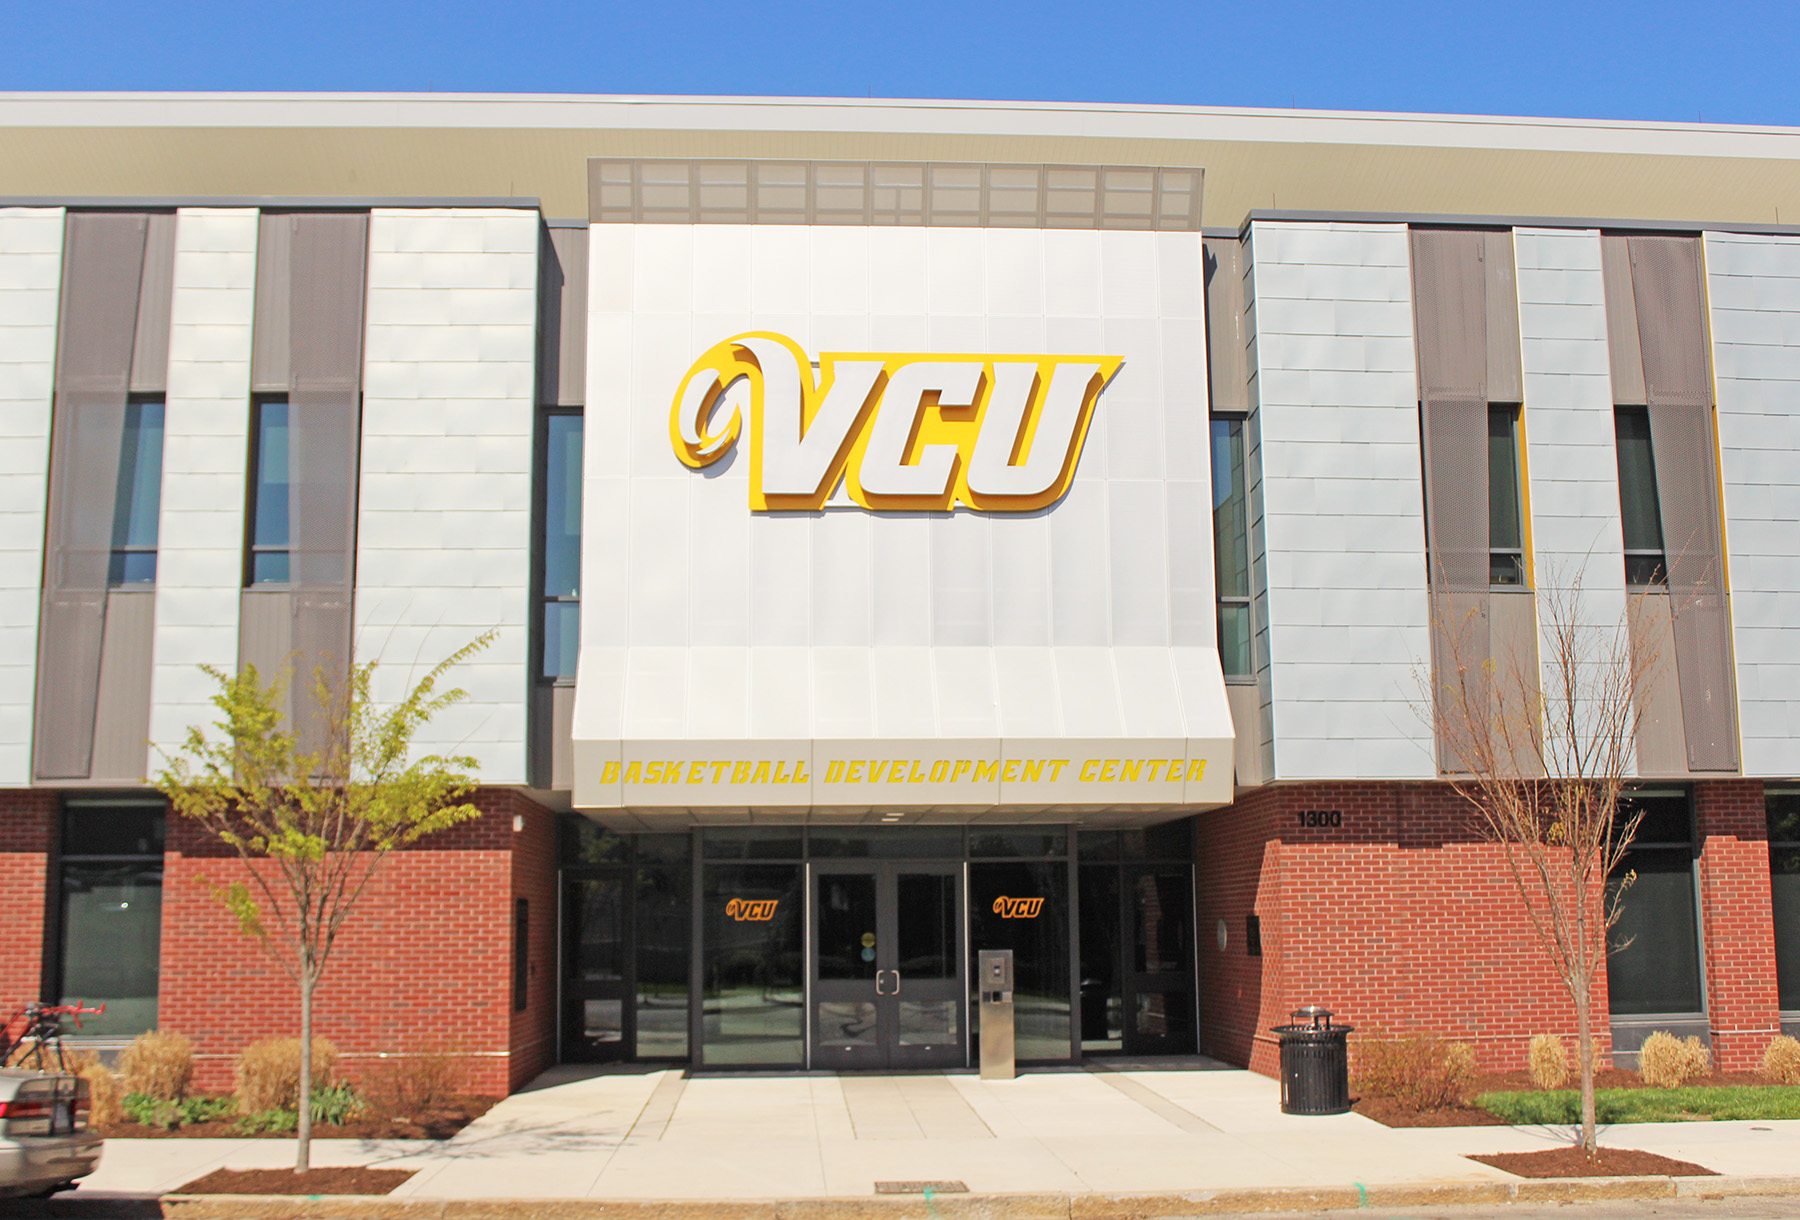 VCU Basketball Training Facility project from Commonwealth Blinds